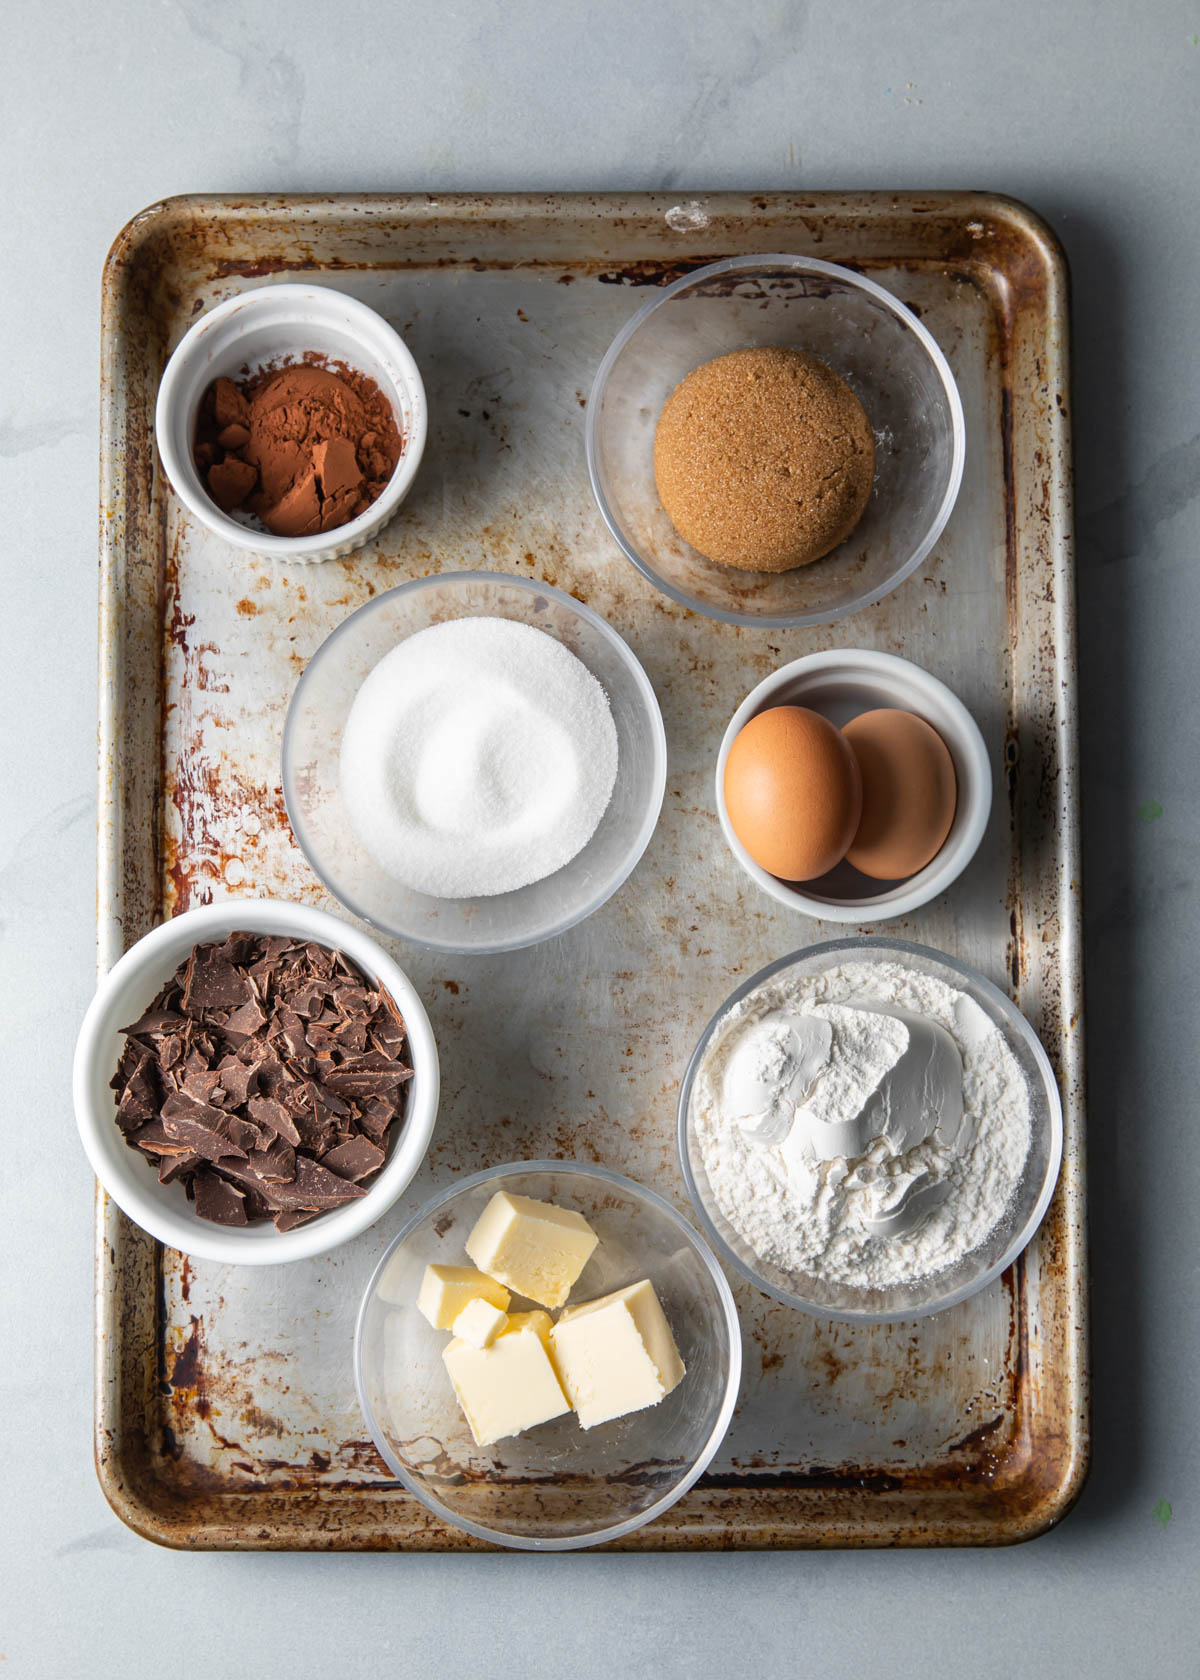 Ingredients for chocolate peppermint cookies